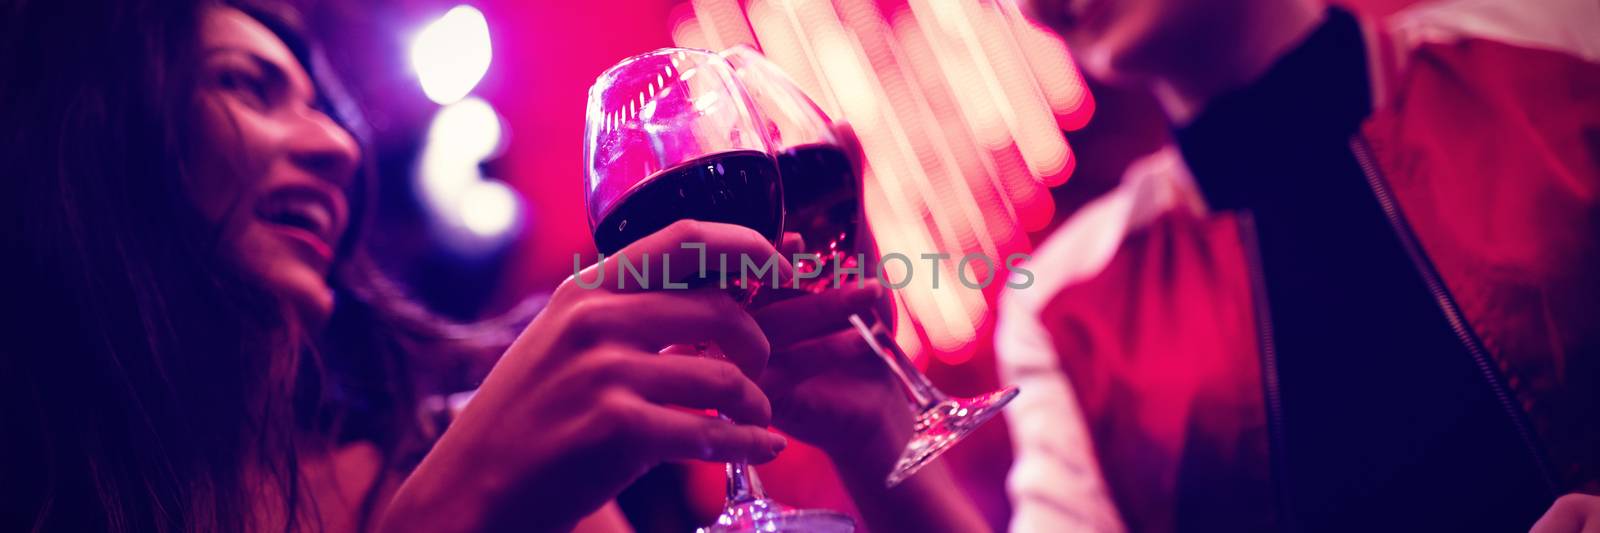 Smiling friends toasting wine glasses in bar